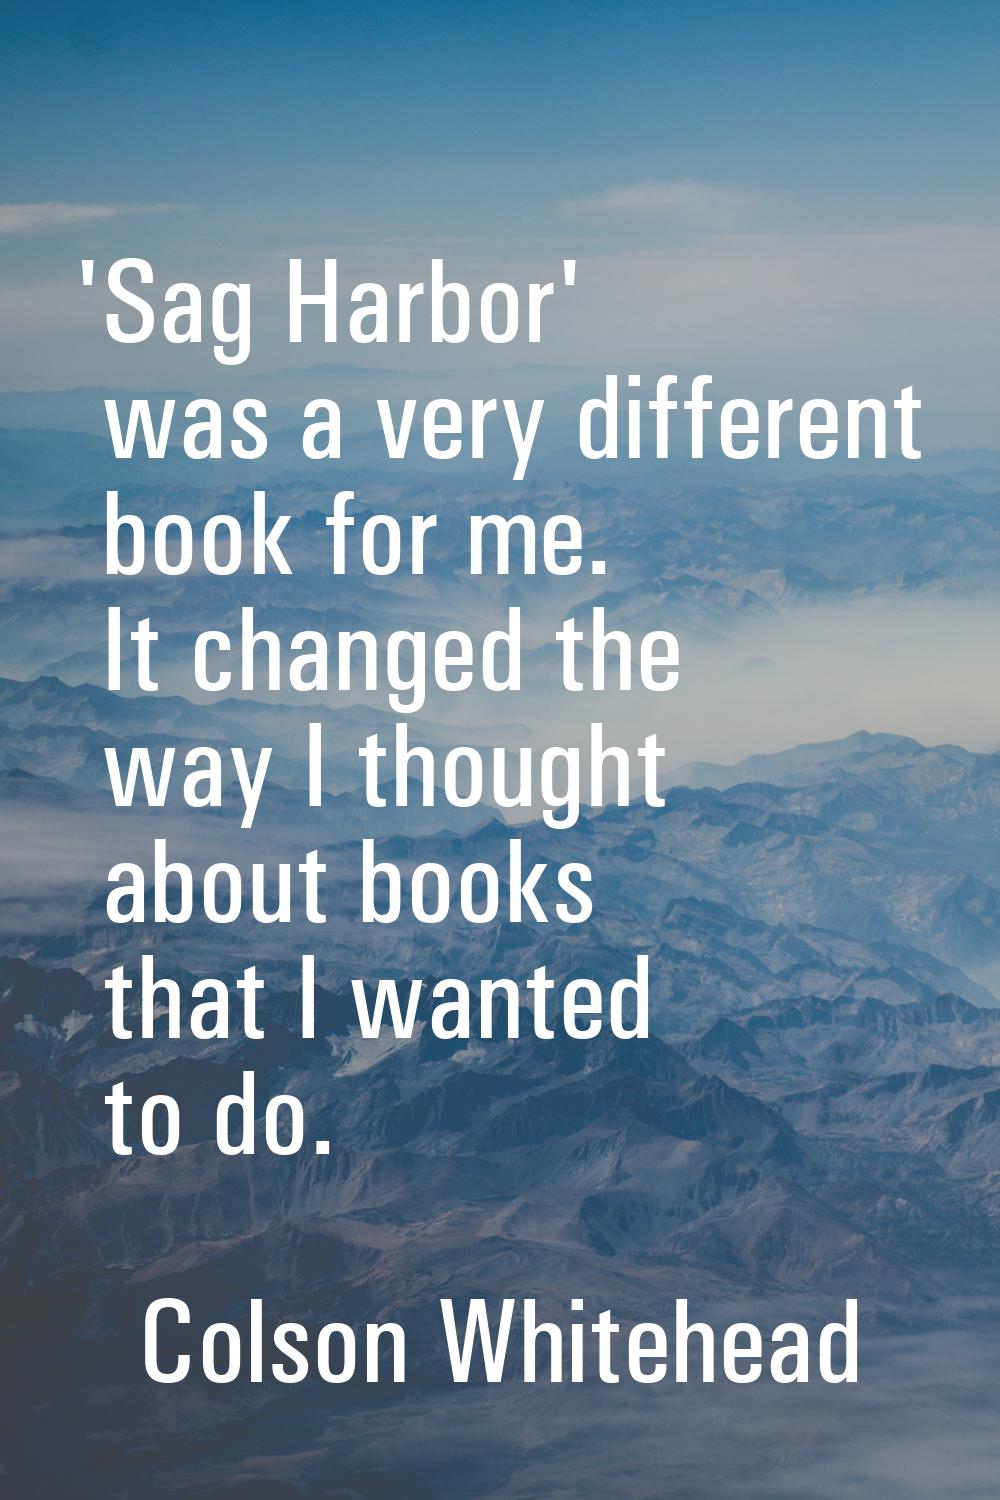 'Sag Harbor' was a very different book for me. It changed the way I thought about books that I want